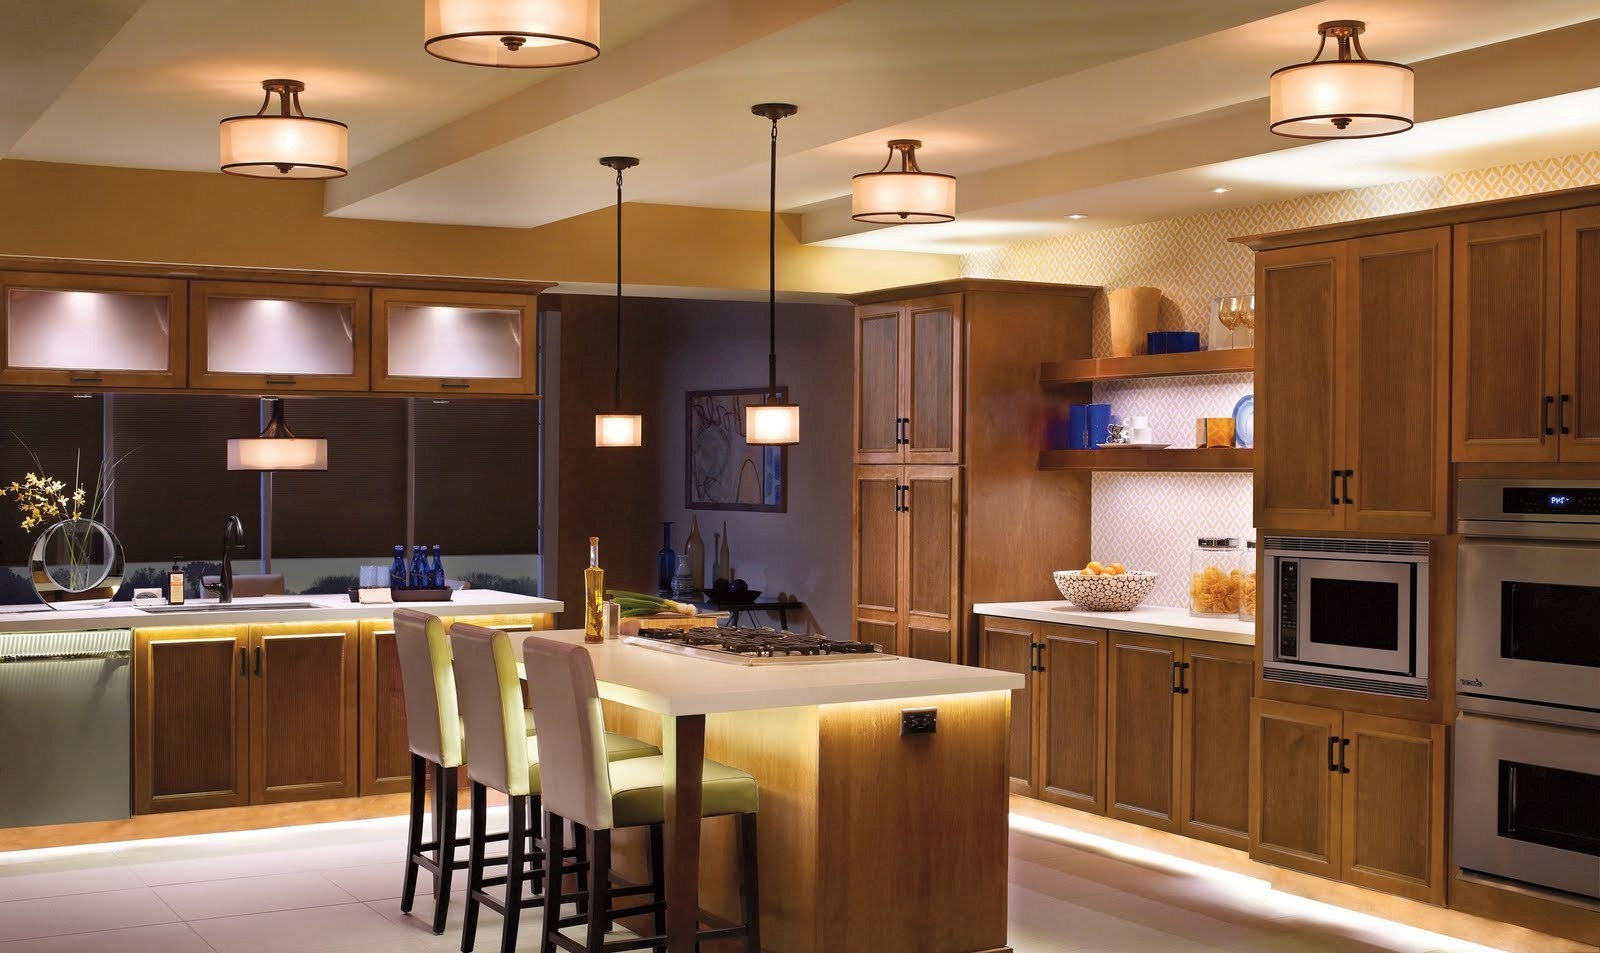 Best Lighting For Low Kitchen Ceiling